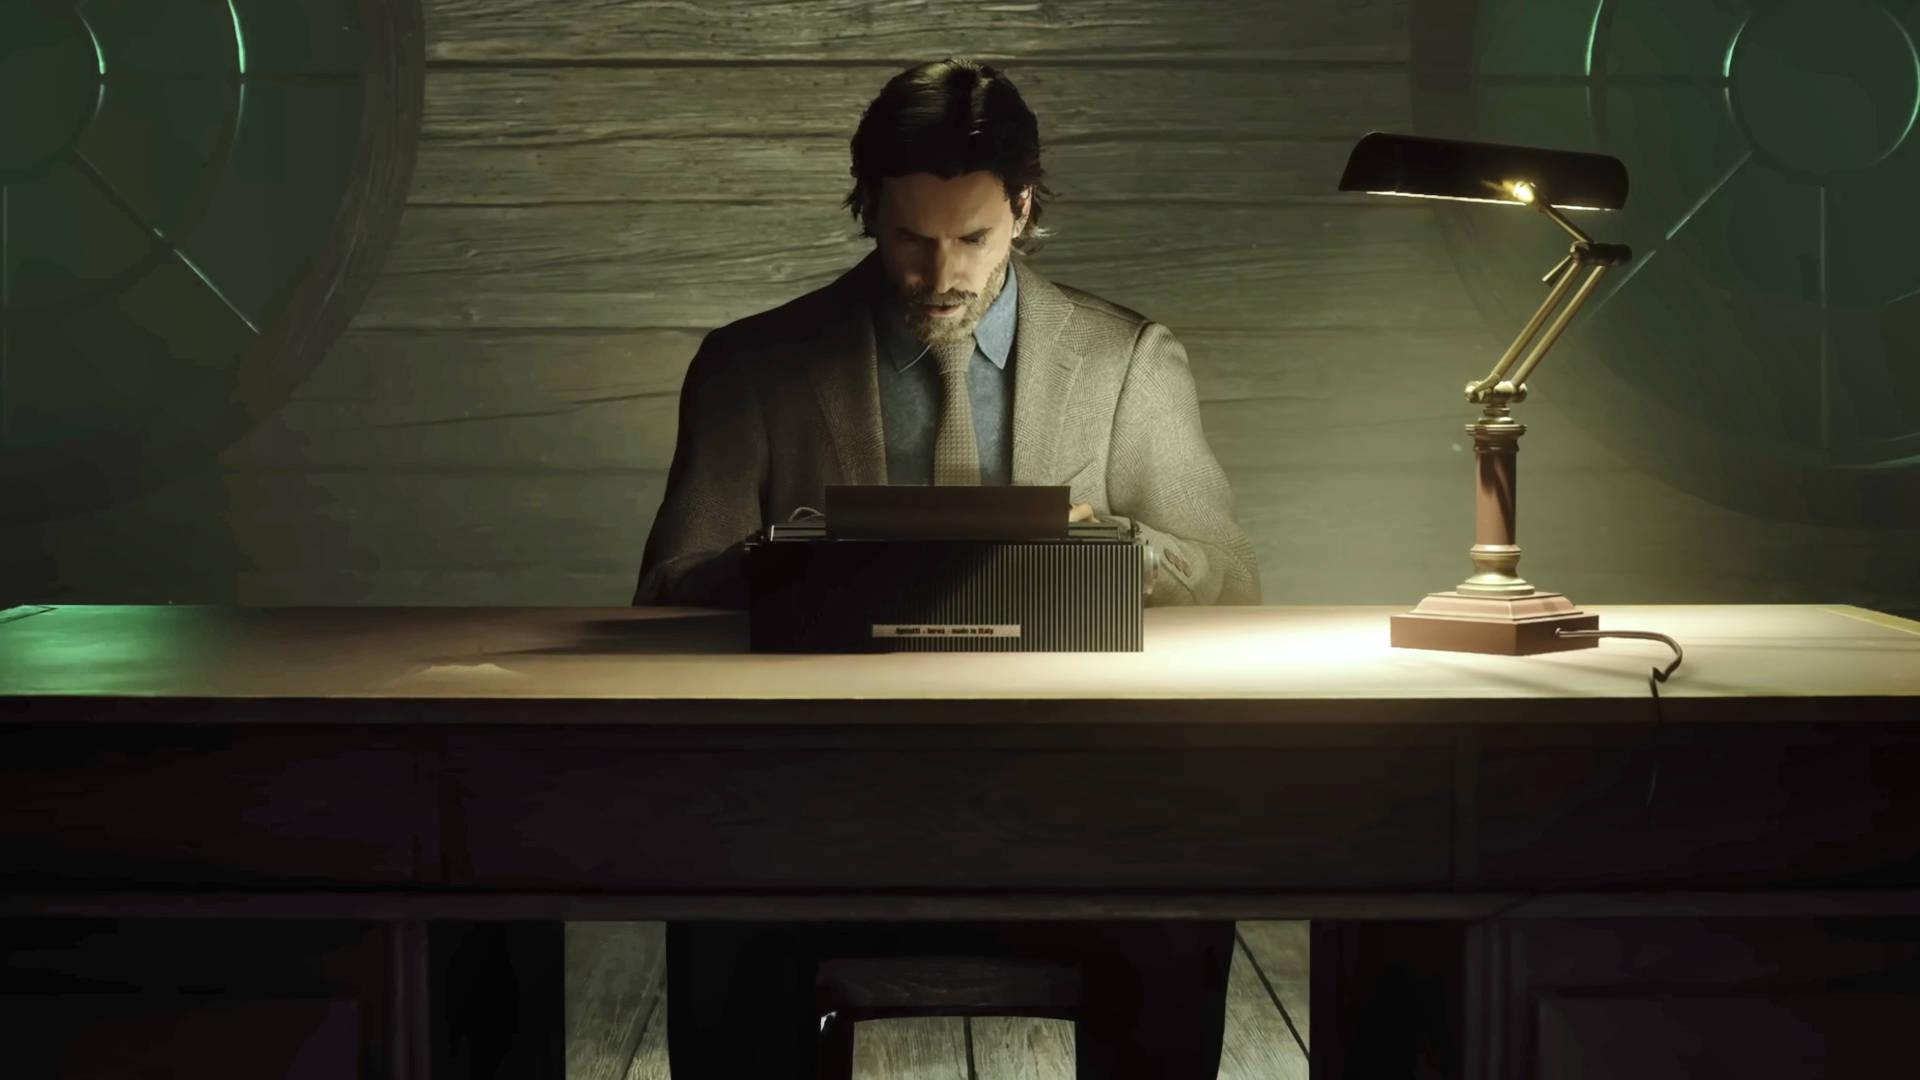 Alan Wake 2 release date, gameplay, and trailers